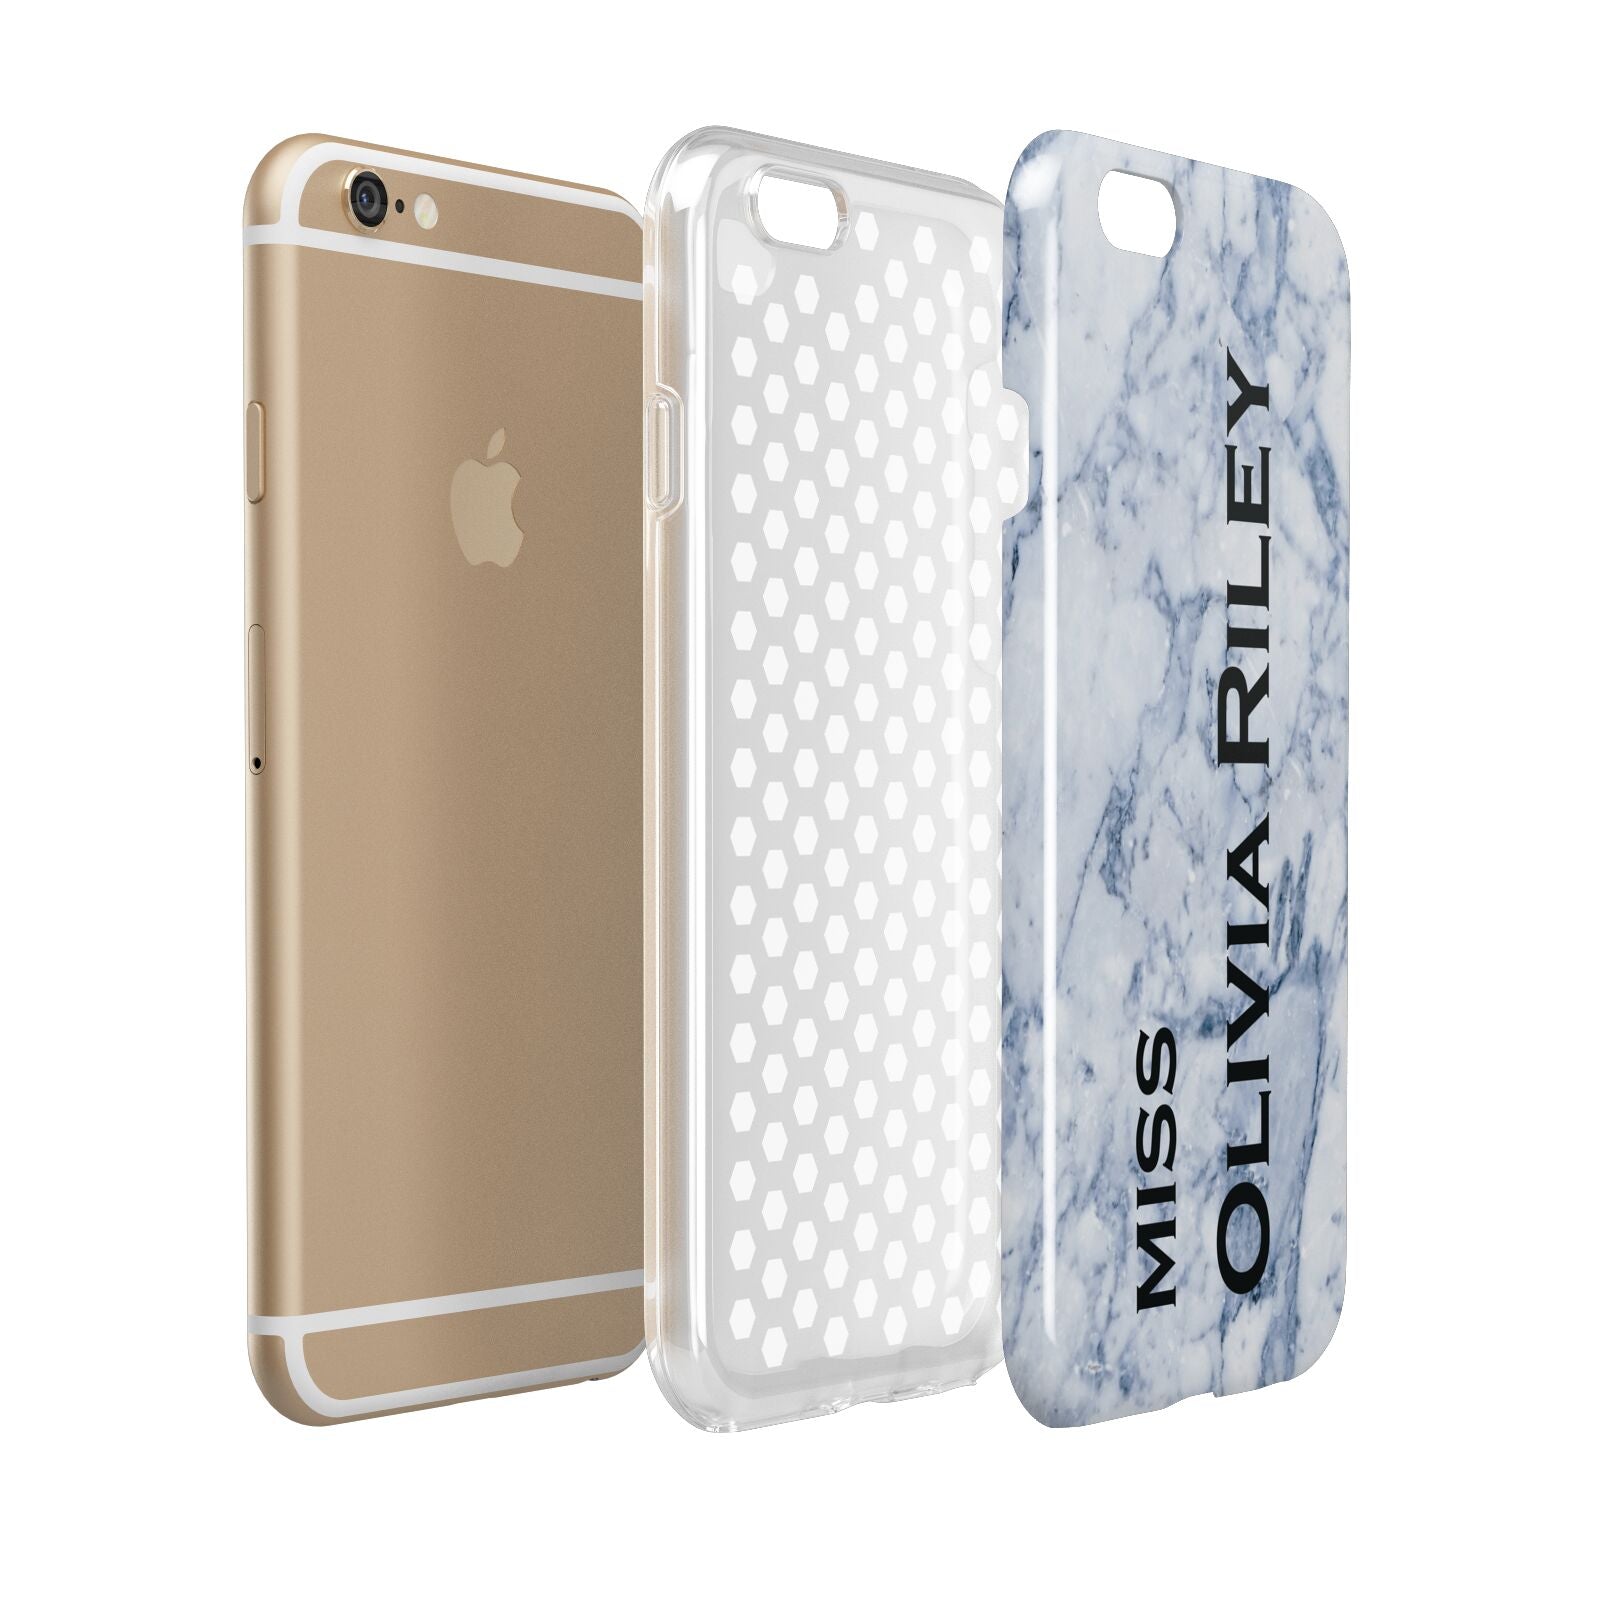 Full Name Grey Marble Apple iPhone 6 3D Tough Case Expanded view